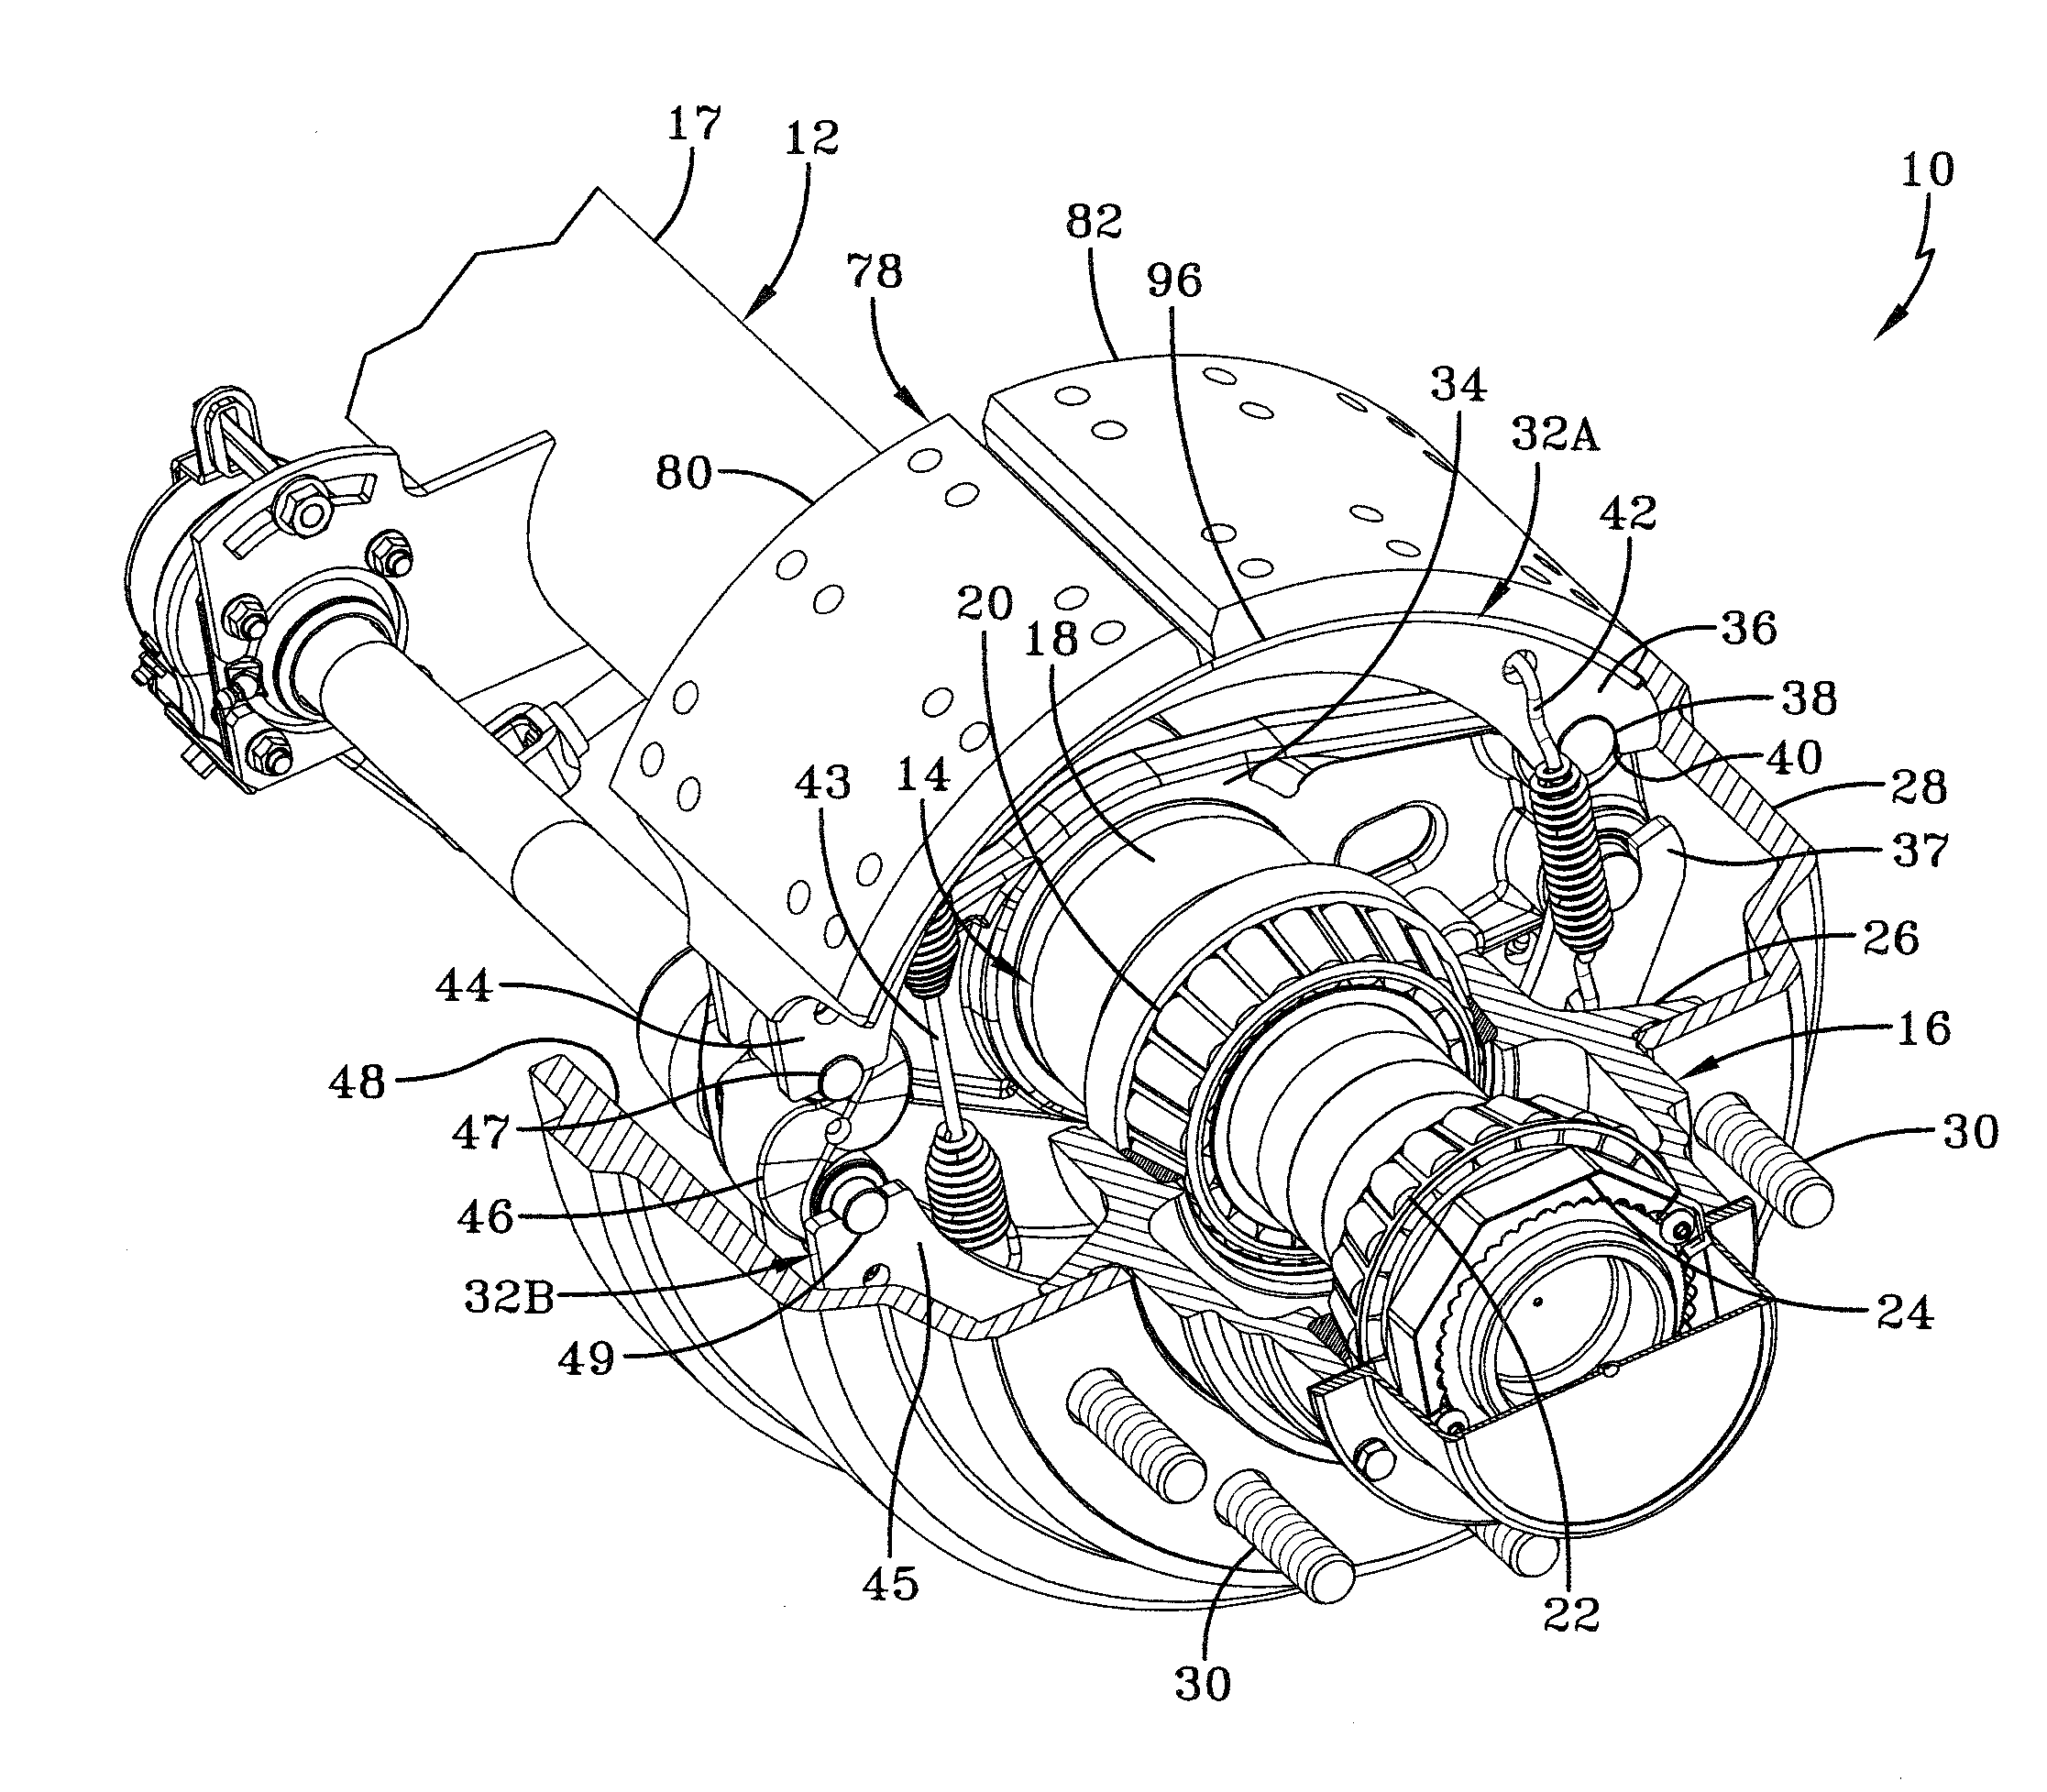 Heavy-duty vehicle brake assembly with sealing interface